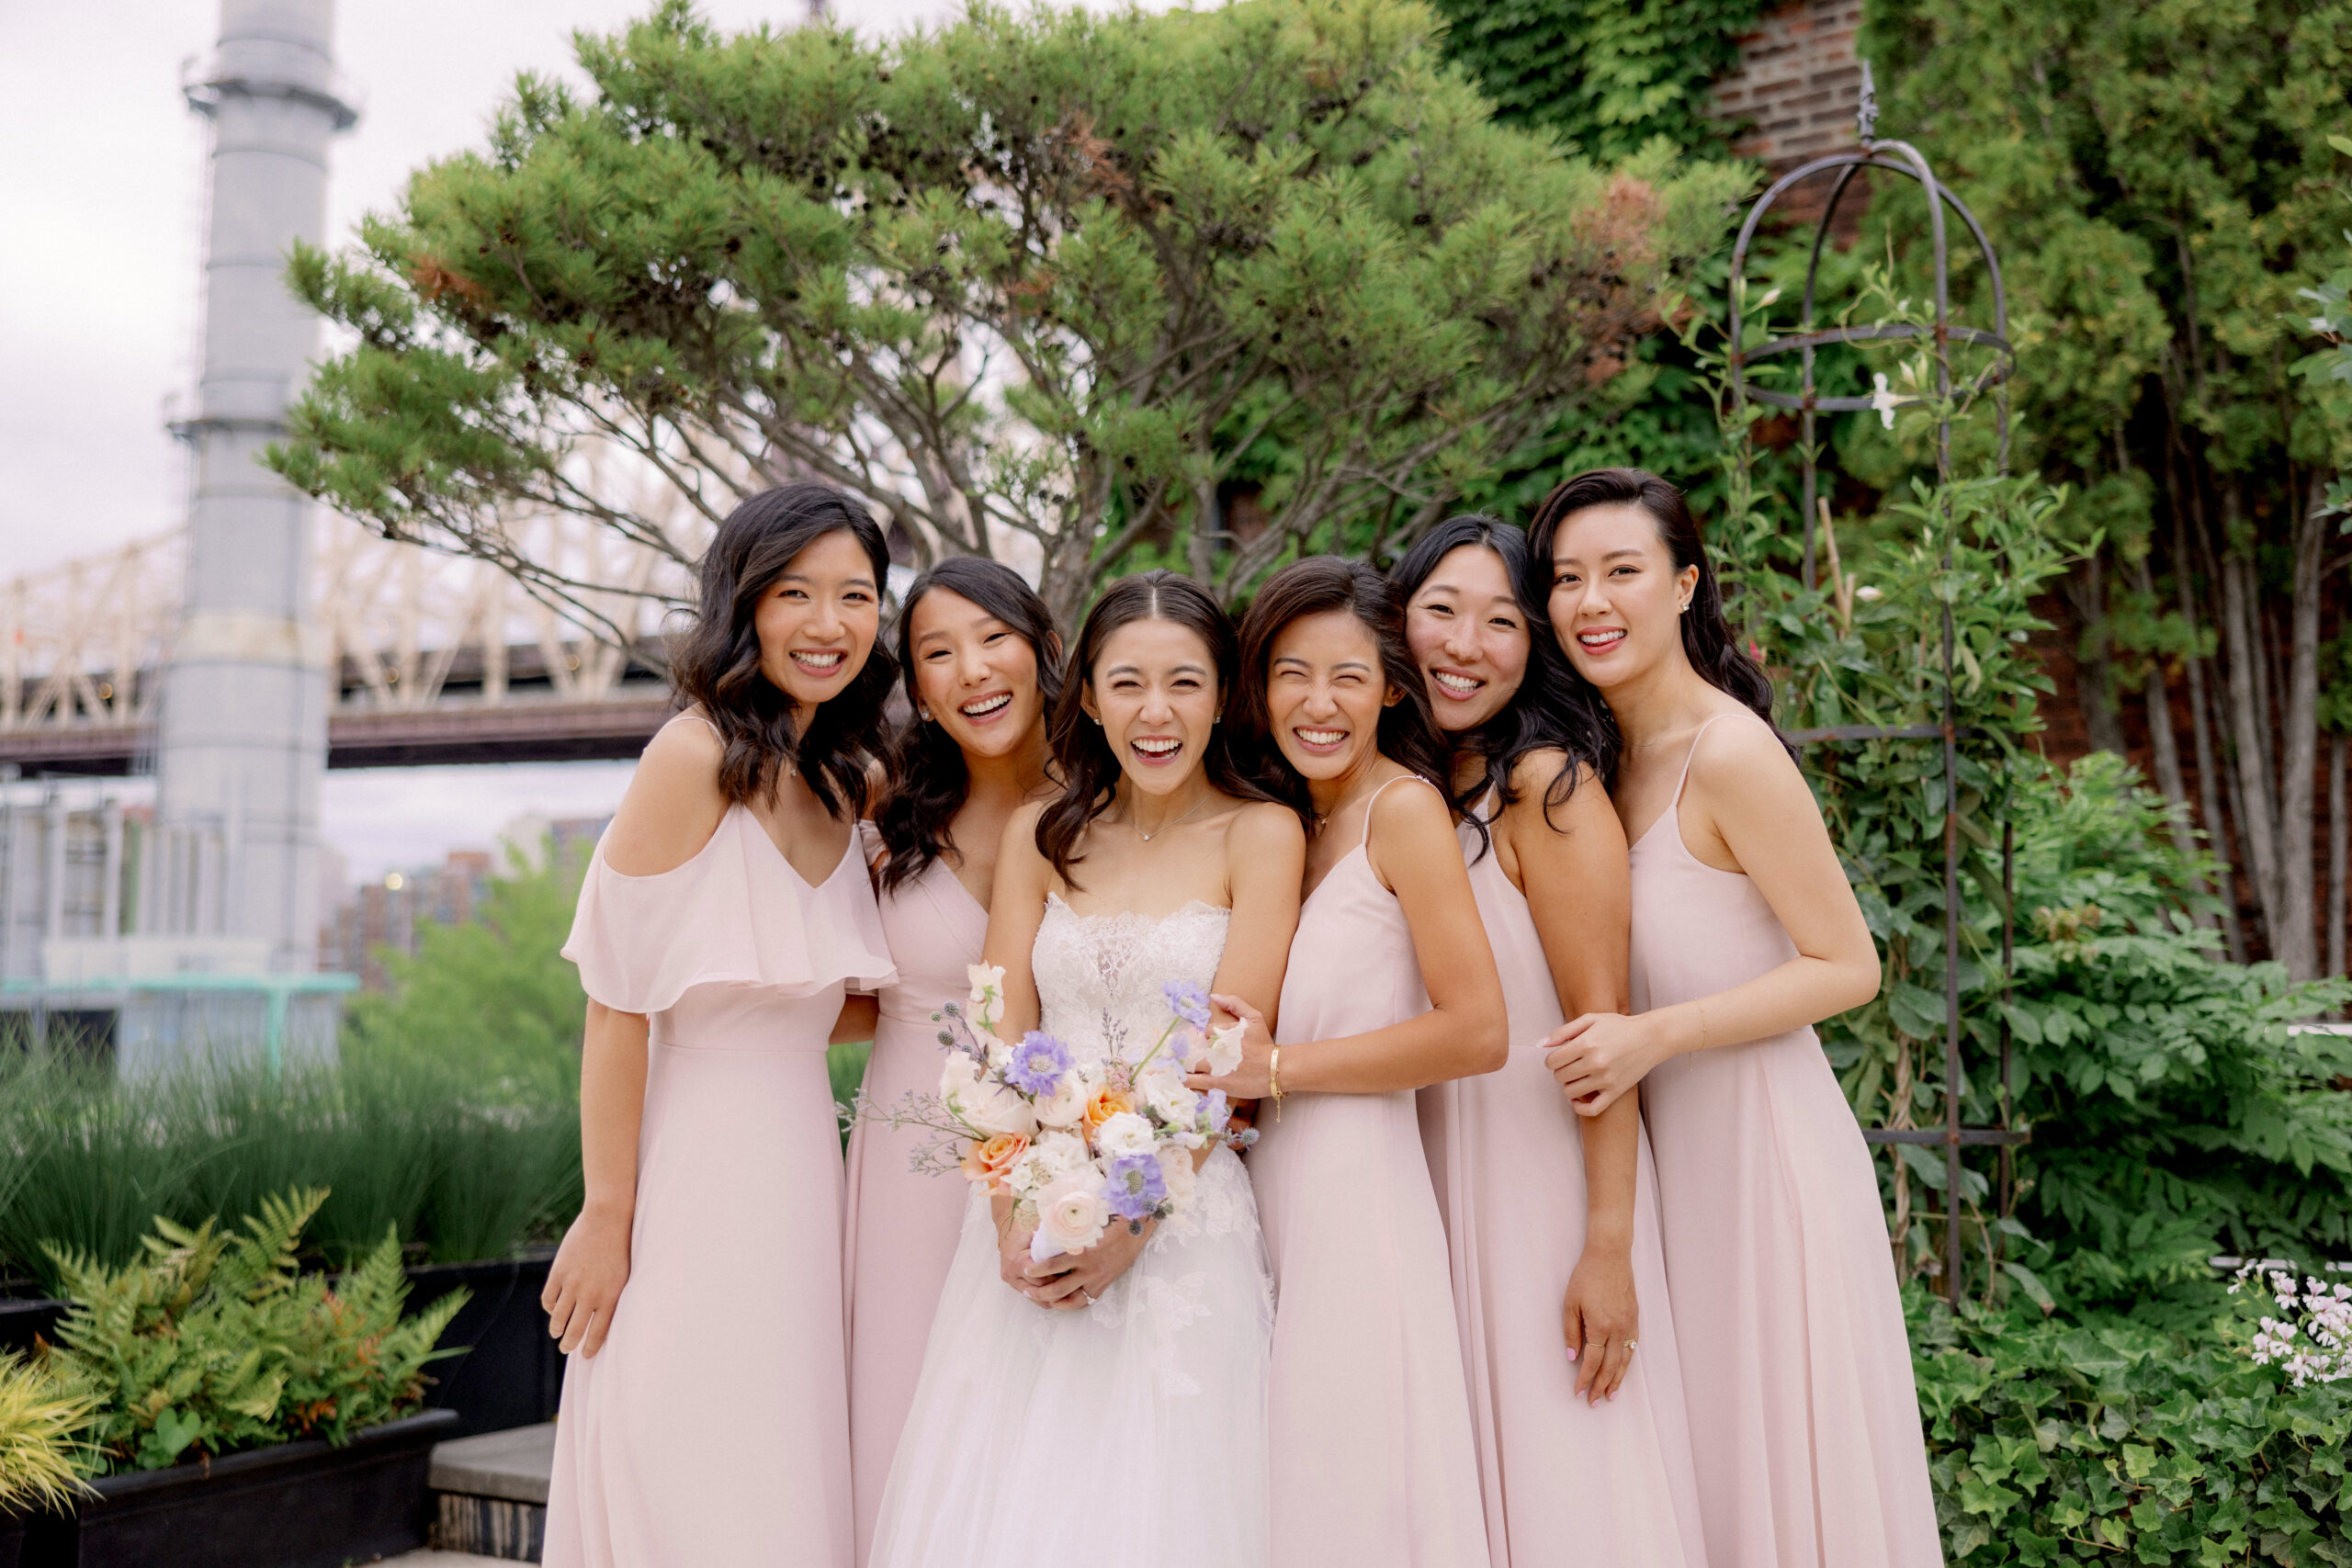 The bride and the bridesmaids with The Brooklyn Bridge in the background. High-quality wedding photography image by Jenny Fu Studio.